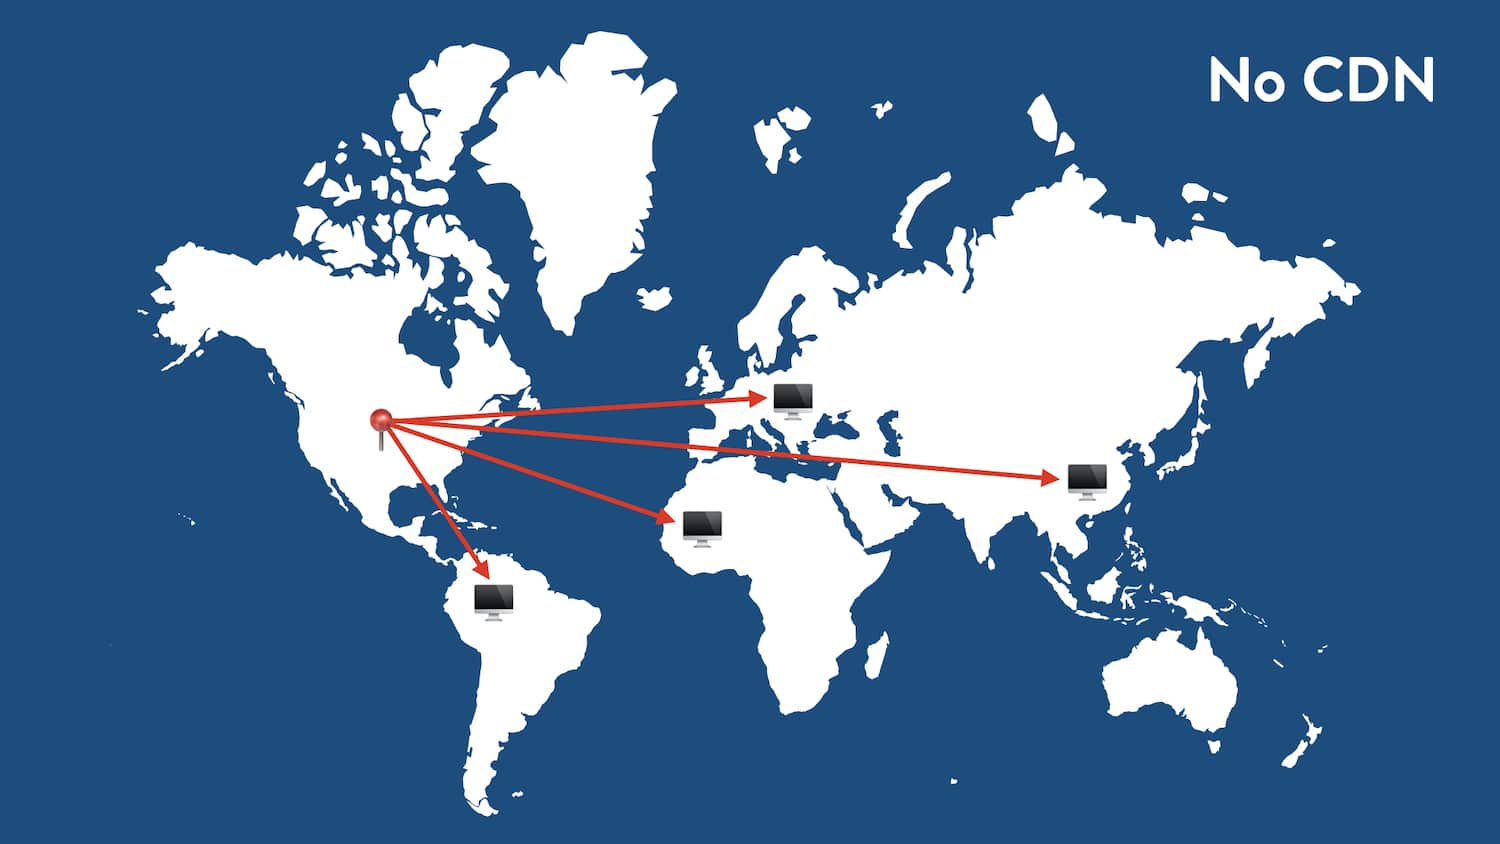 Global traffic routing with no CDN.